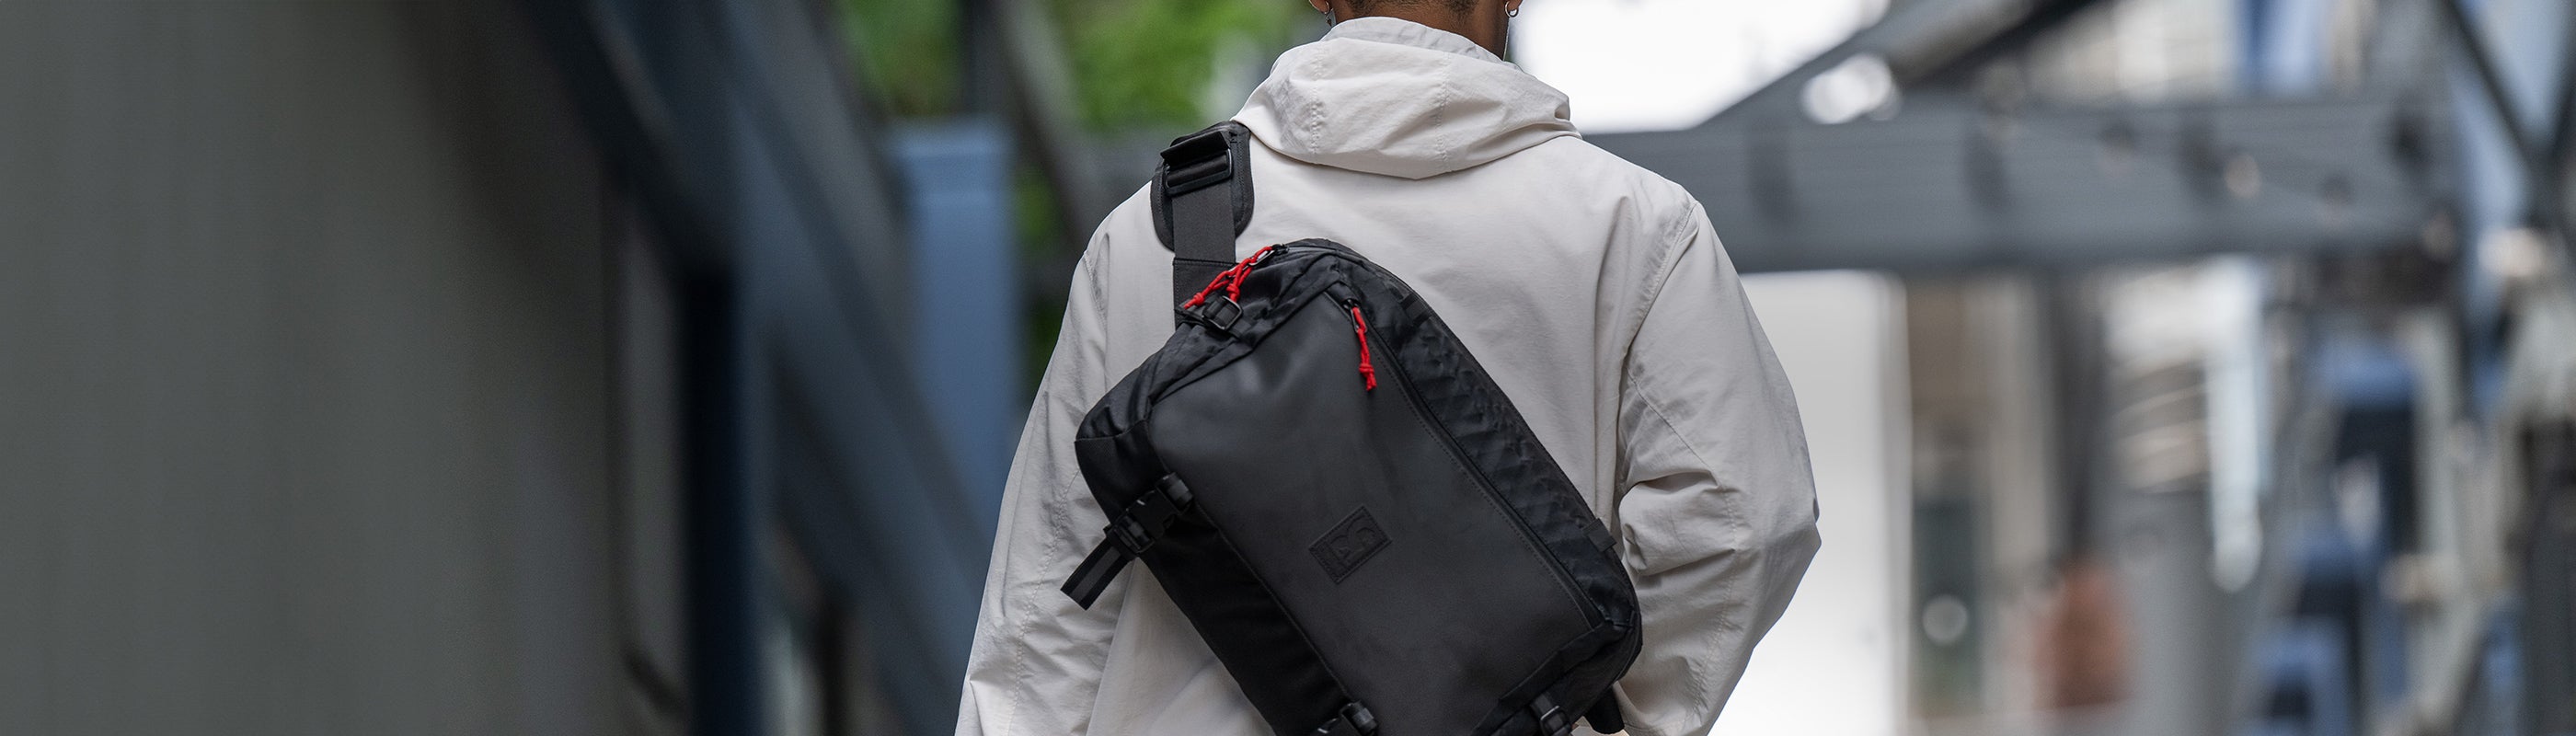 The 16 Best Men's Sling Bags You Can Buy